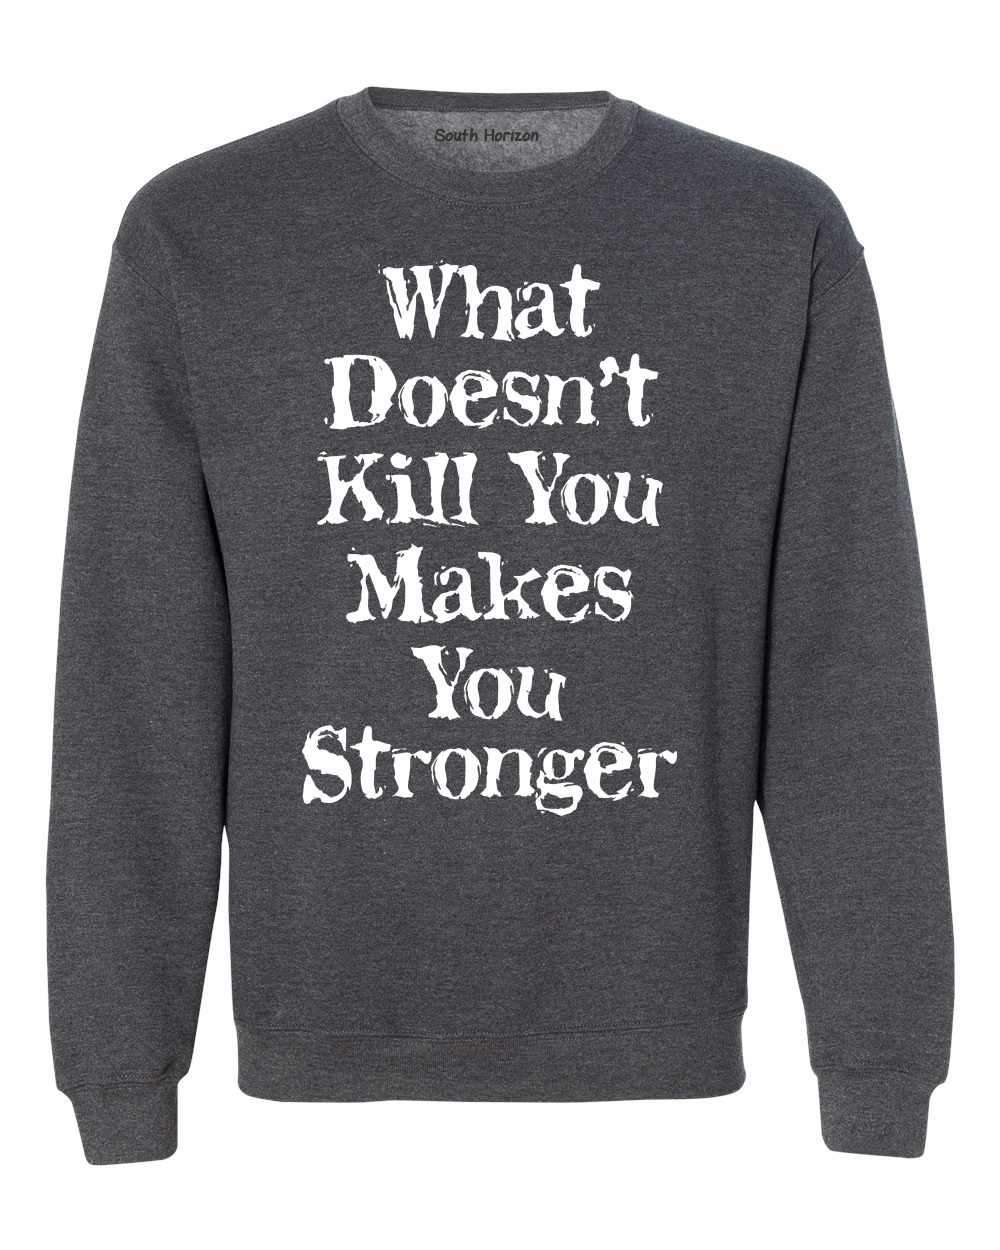 What Doesn't Kill You Makes You Stronger on SweatShirt (#1248-11)